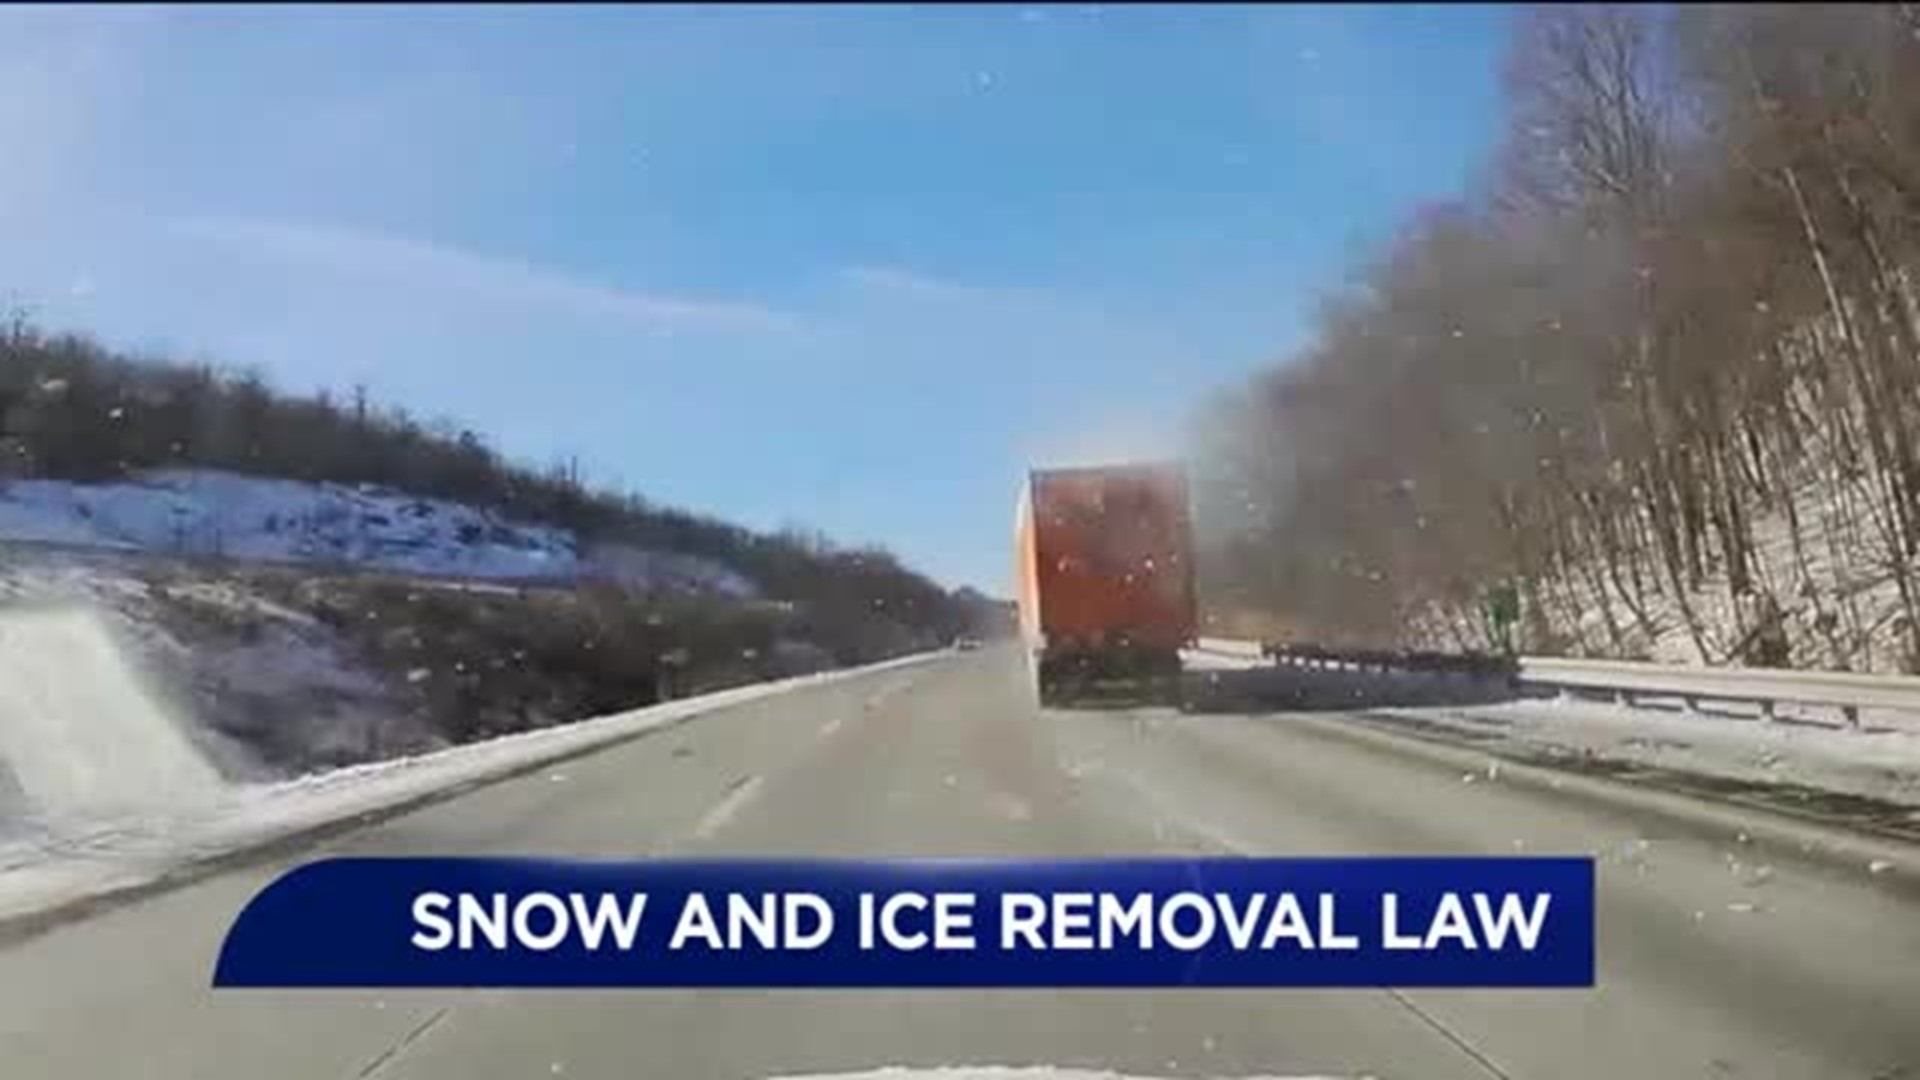 Making Winter Travel Safer: Snow and Ice Removal Law Passes State Senate Committee